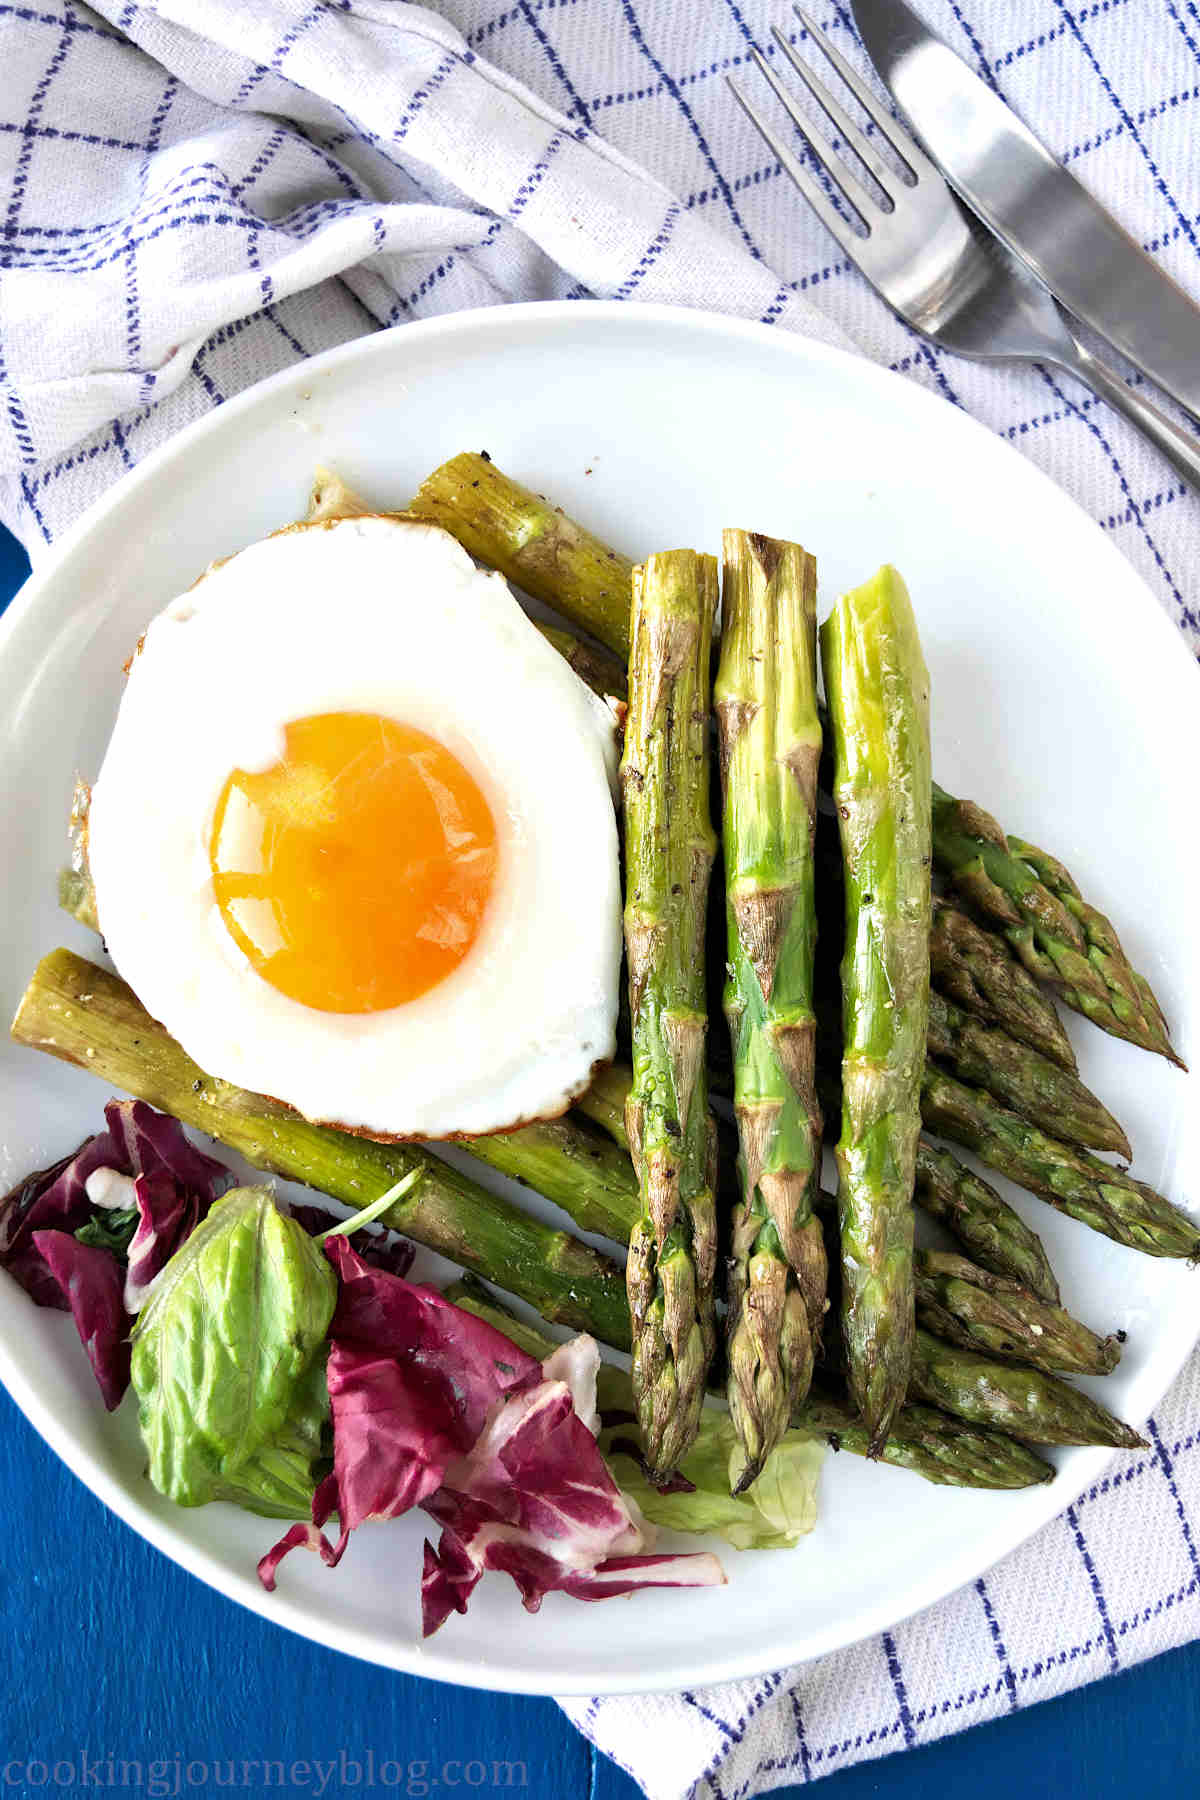 Roasted asparagus with egg, served on blue table